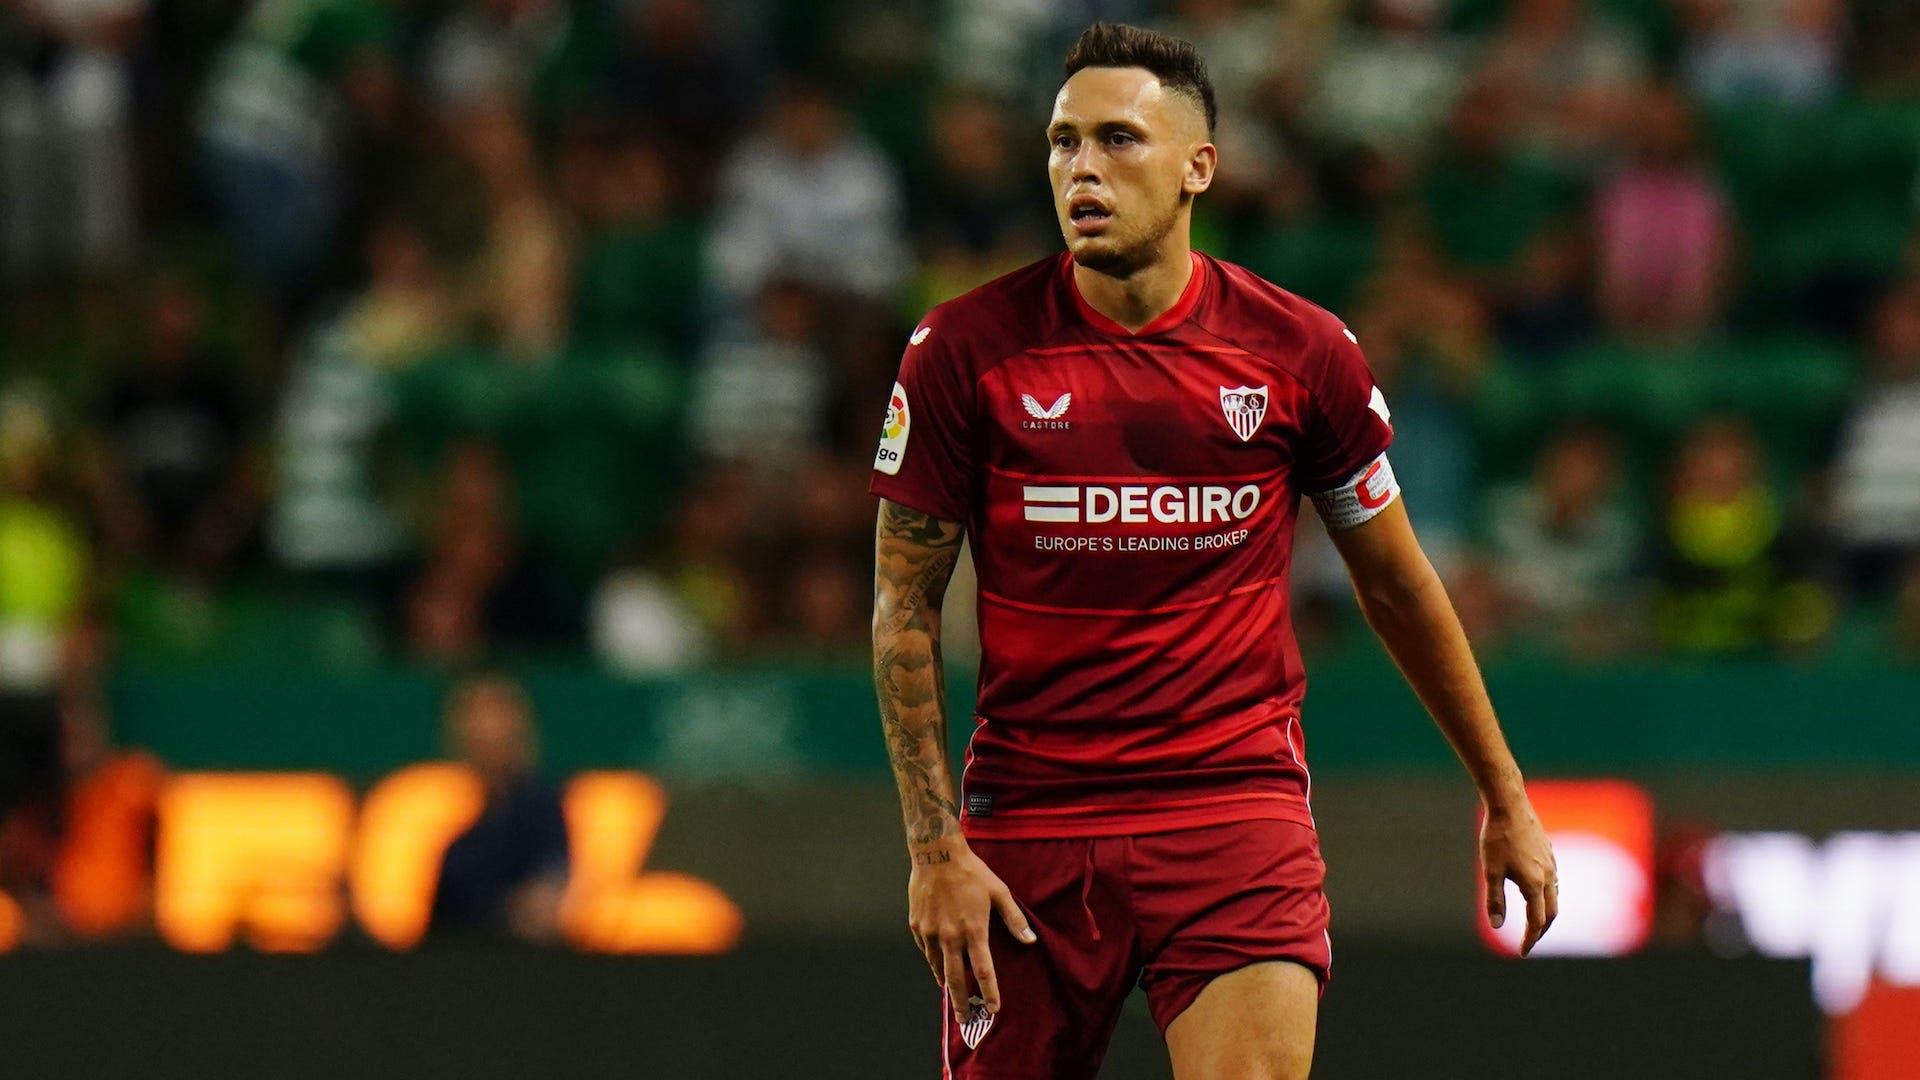 There is an Ocampos case at Sevilla FC